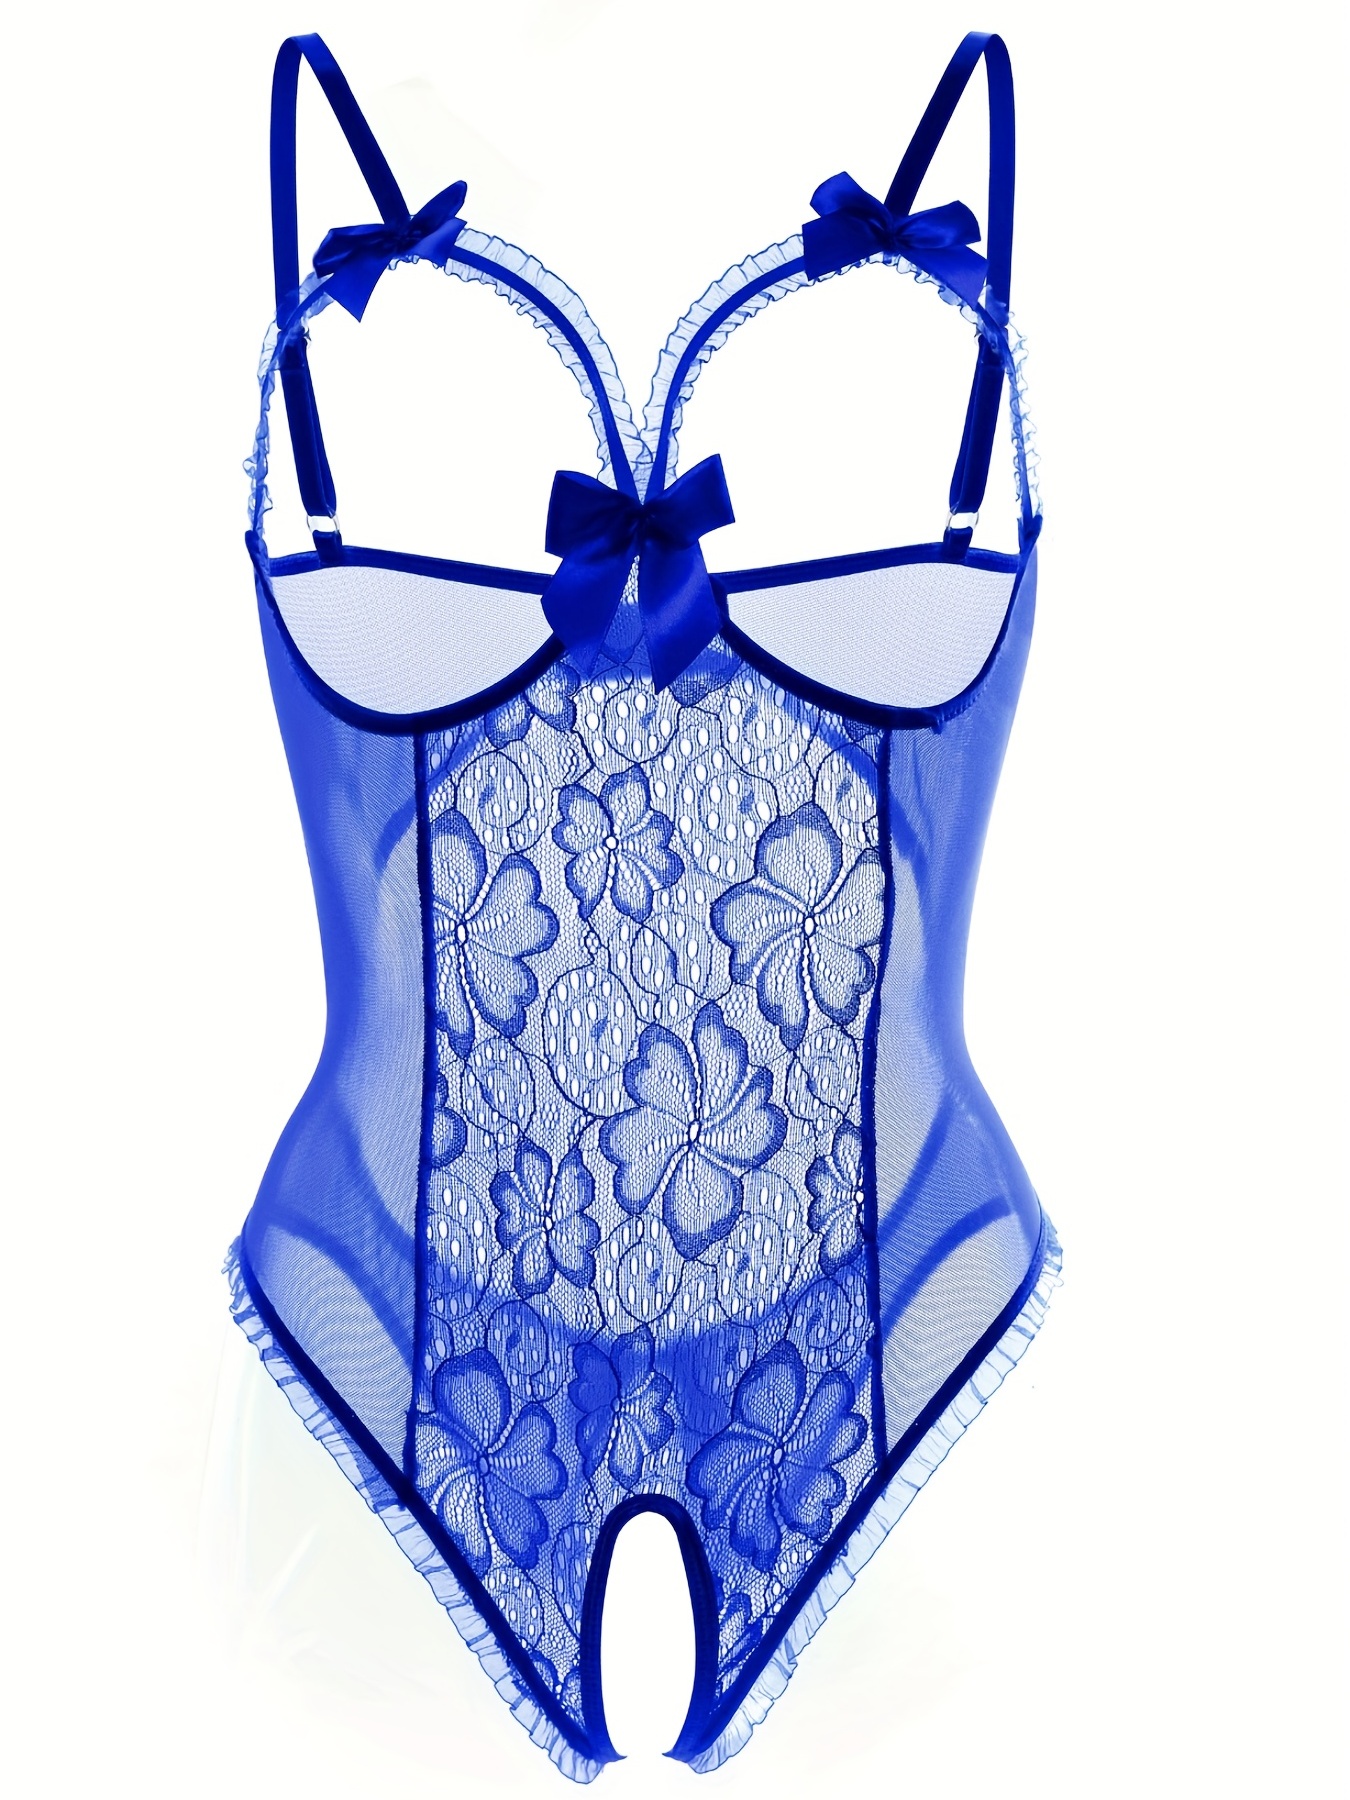 Aerusi Blue Fantasy Lingerie Ruffle Lace Bodysuit Teddy Bra Top G-String  Thong Exotic Backless Naughty Constume